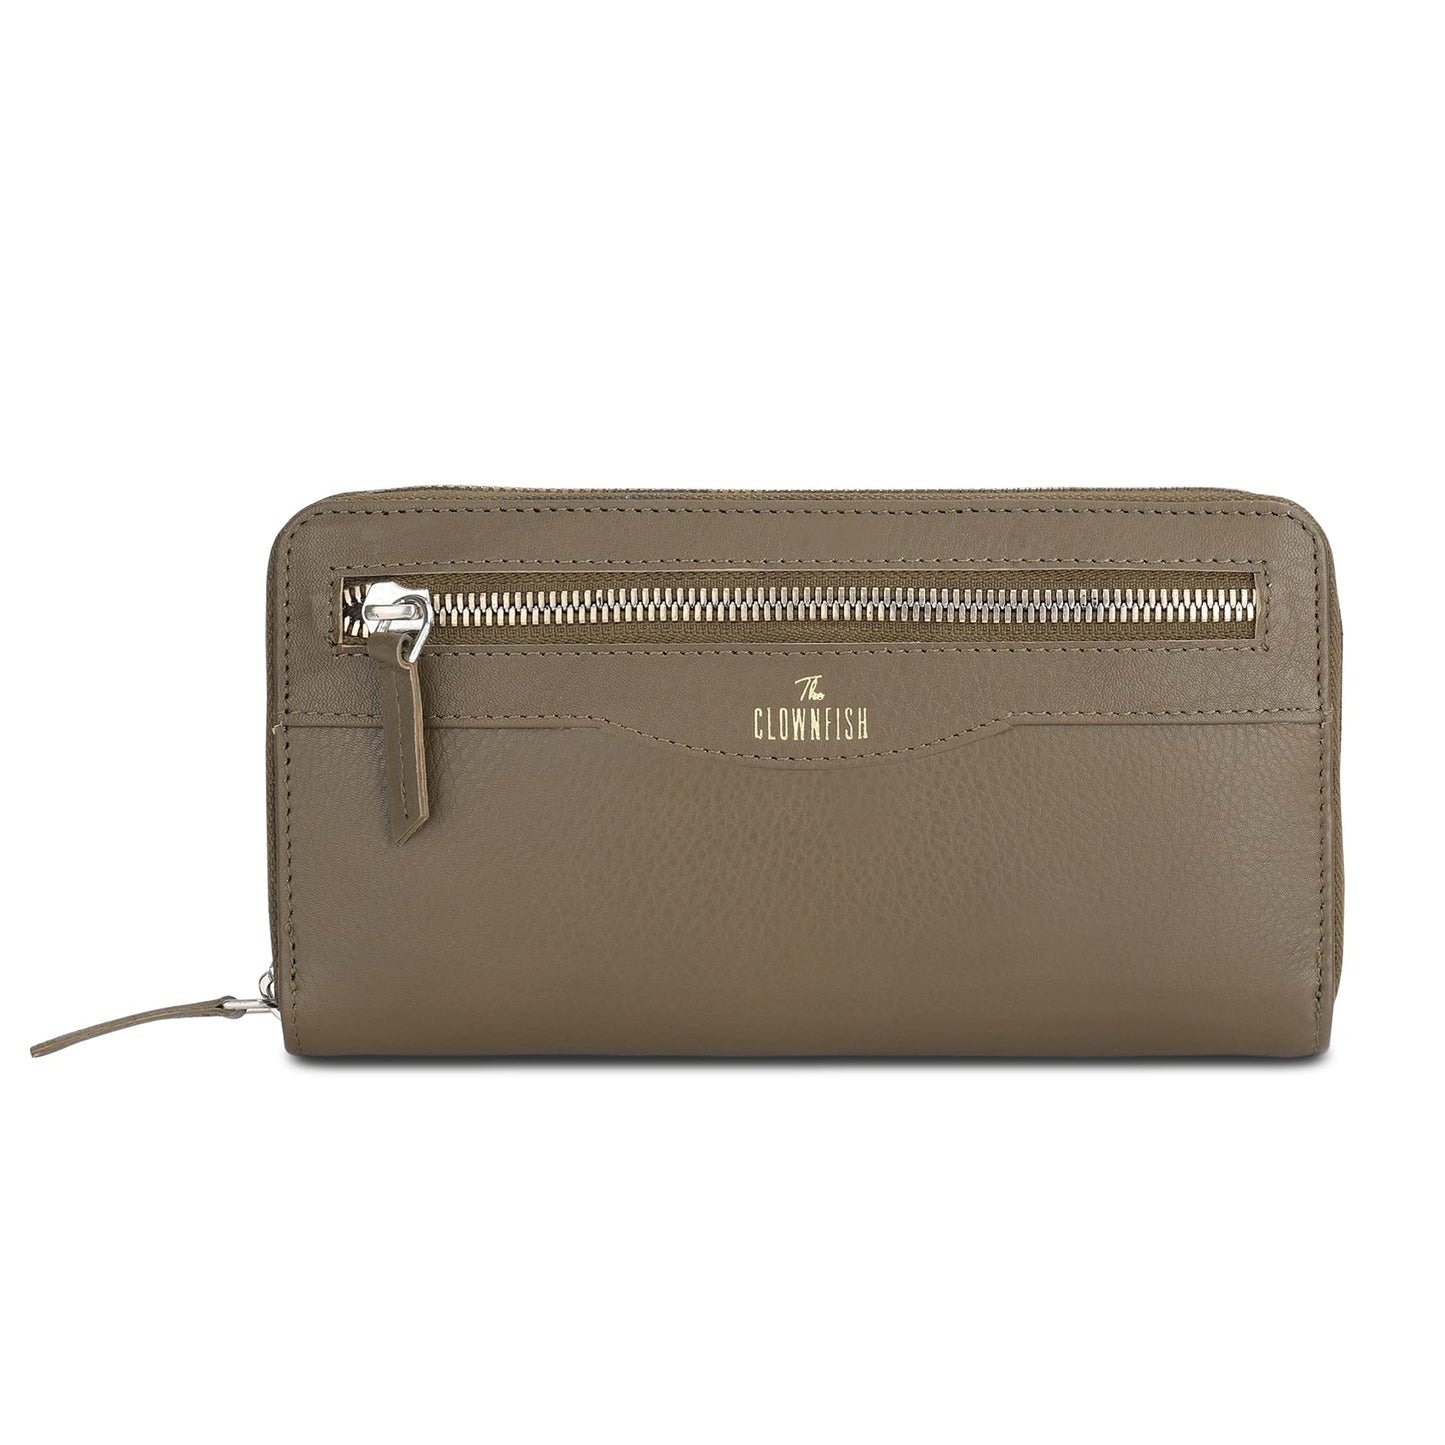 THE CLOWNFISH Eliana Collection Genuine Leather Zip Around Style Womens Wallet Clutch Ladies Purse with Card Holders (Olive Green)